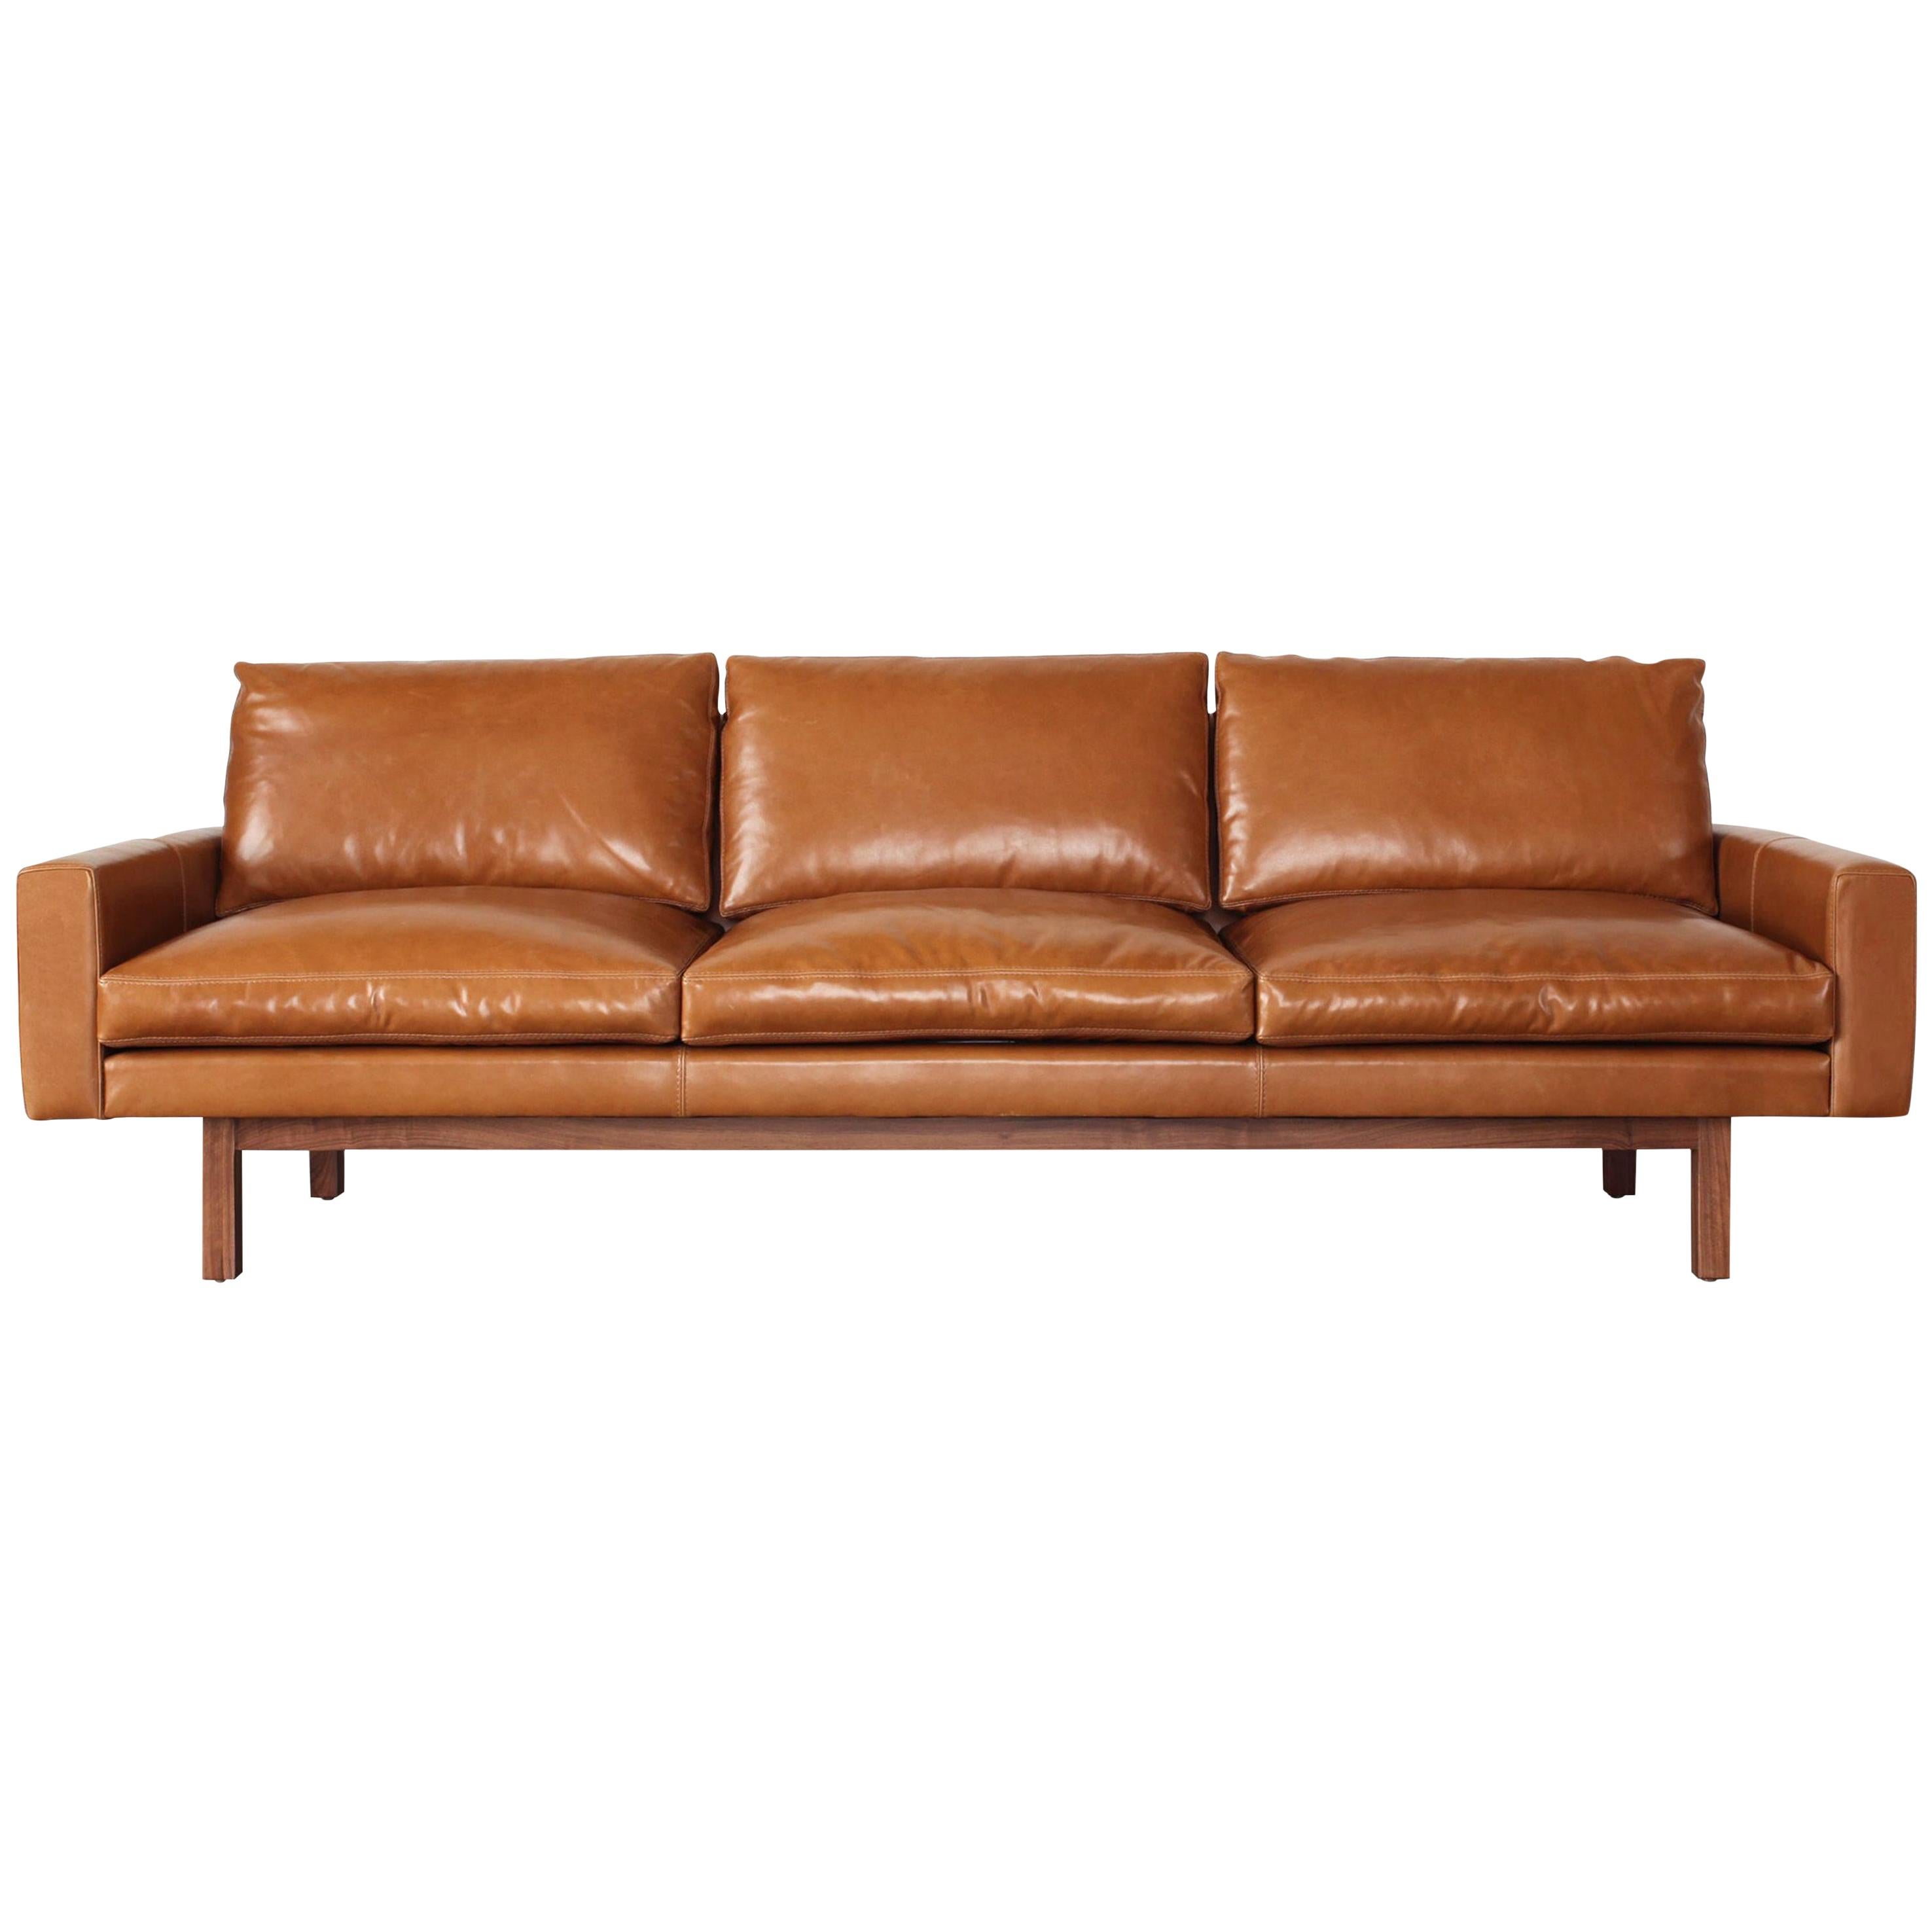 Contemporary Large Standard Sofa in Caramel Leather with Walnut Base, in Stock